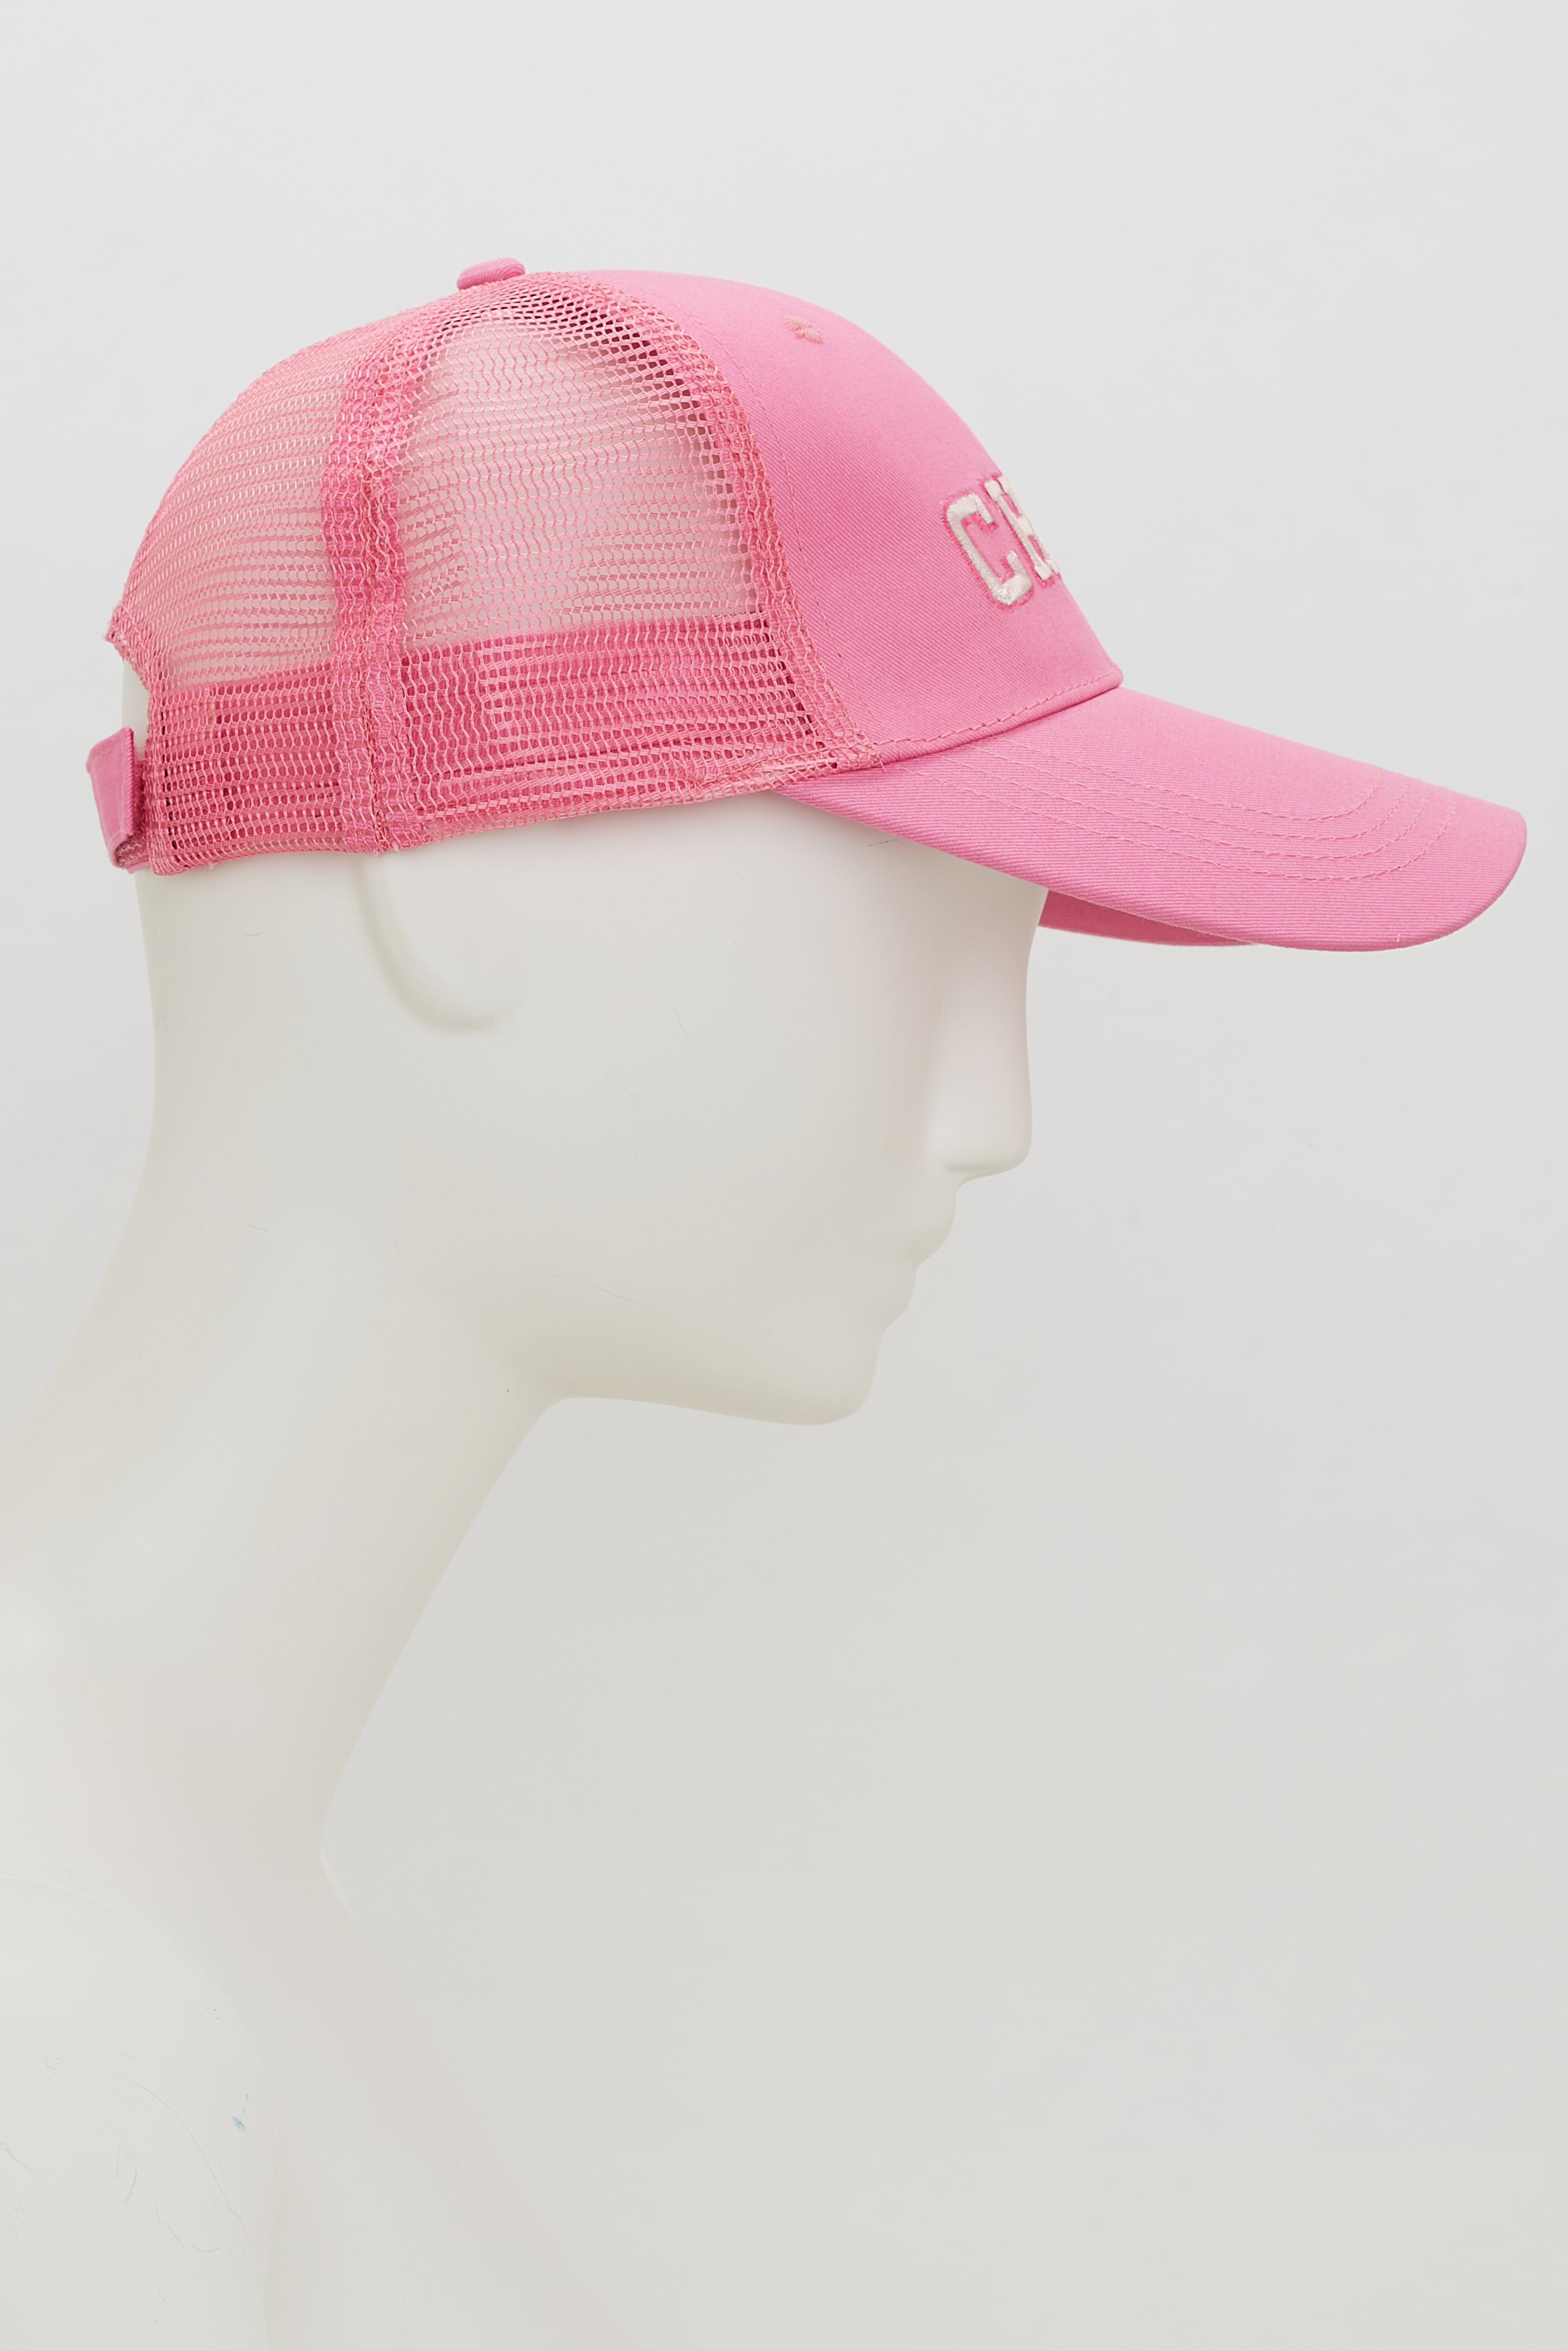 Dorothee-Schumacher-OUTLET-SALE-CHIYC-baseball-cap-Accessoires-OS-shaded-pink-4.jpg